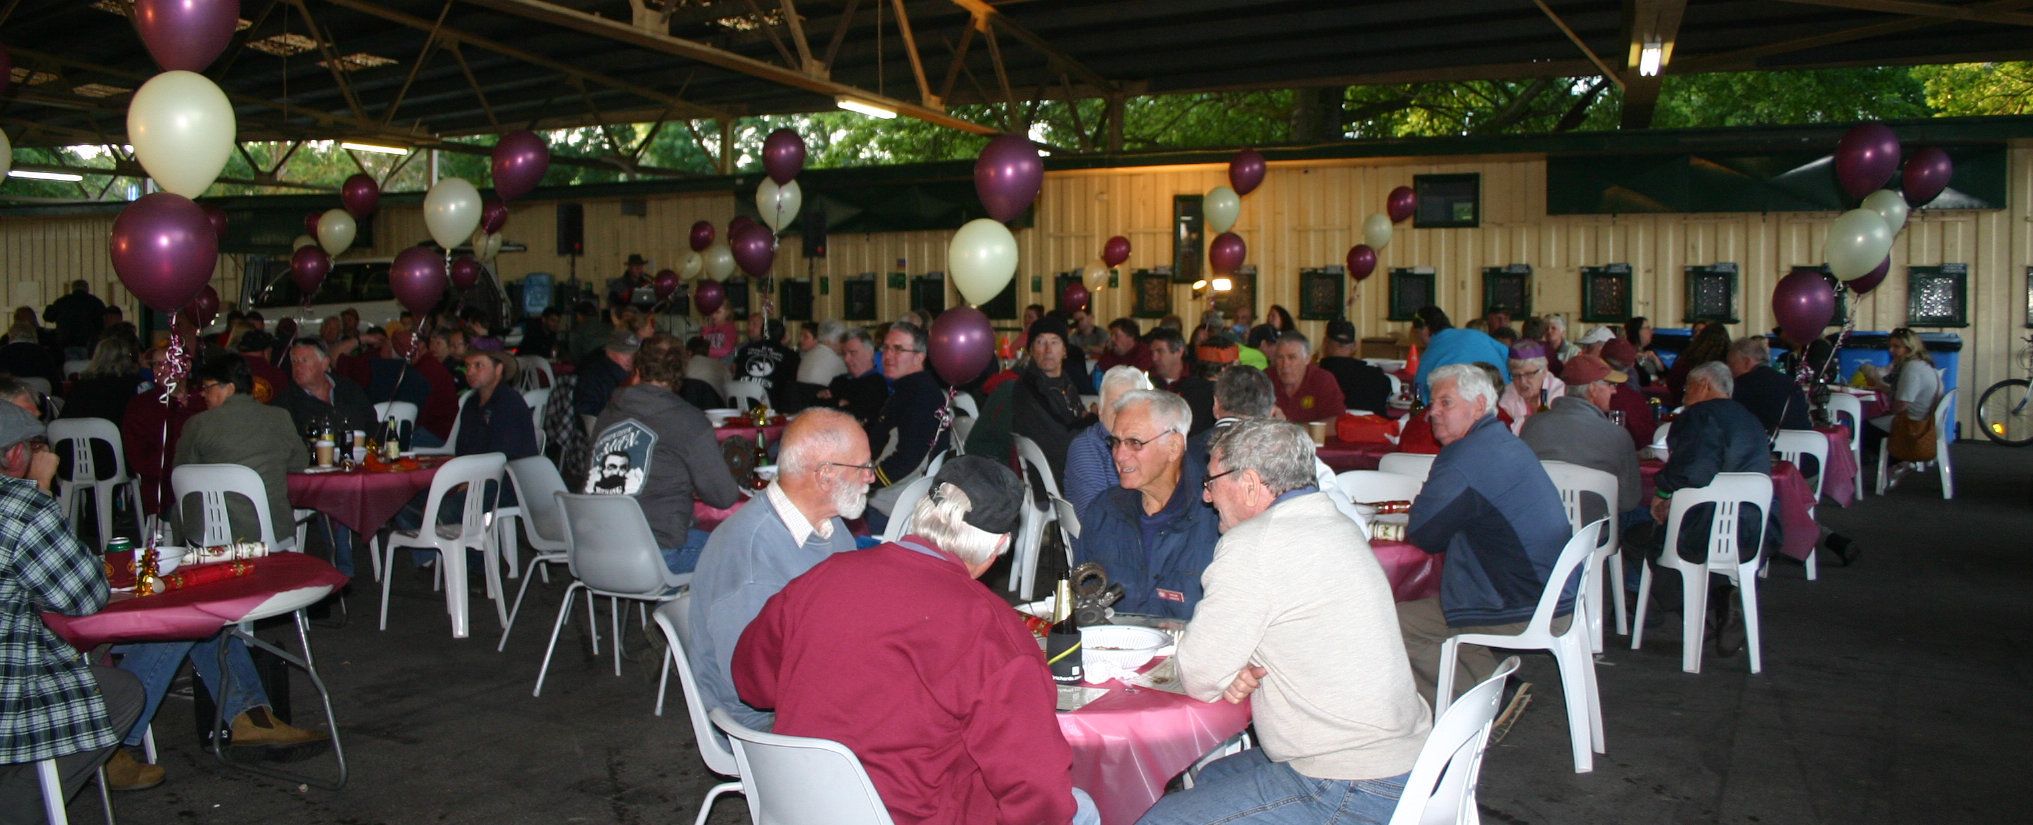 HCVCA Memebrs sitting around having a spit roast meal in the under cover area at Yarra Glen Racecourse.